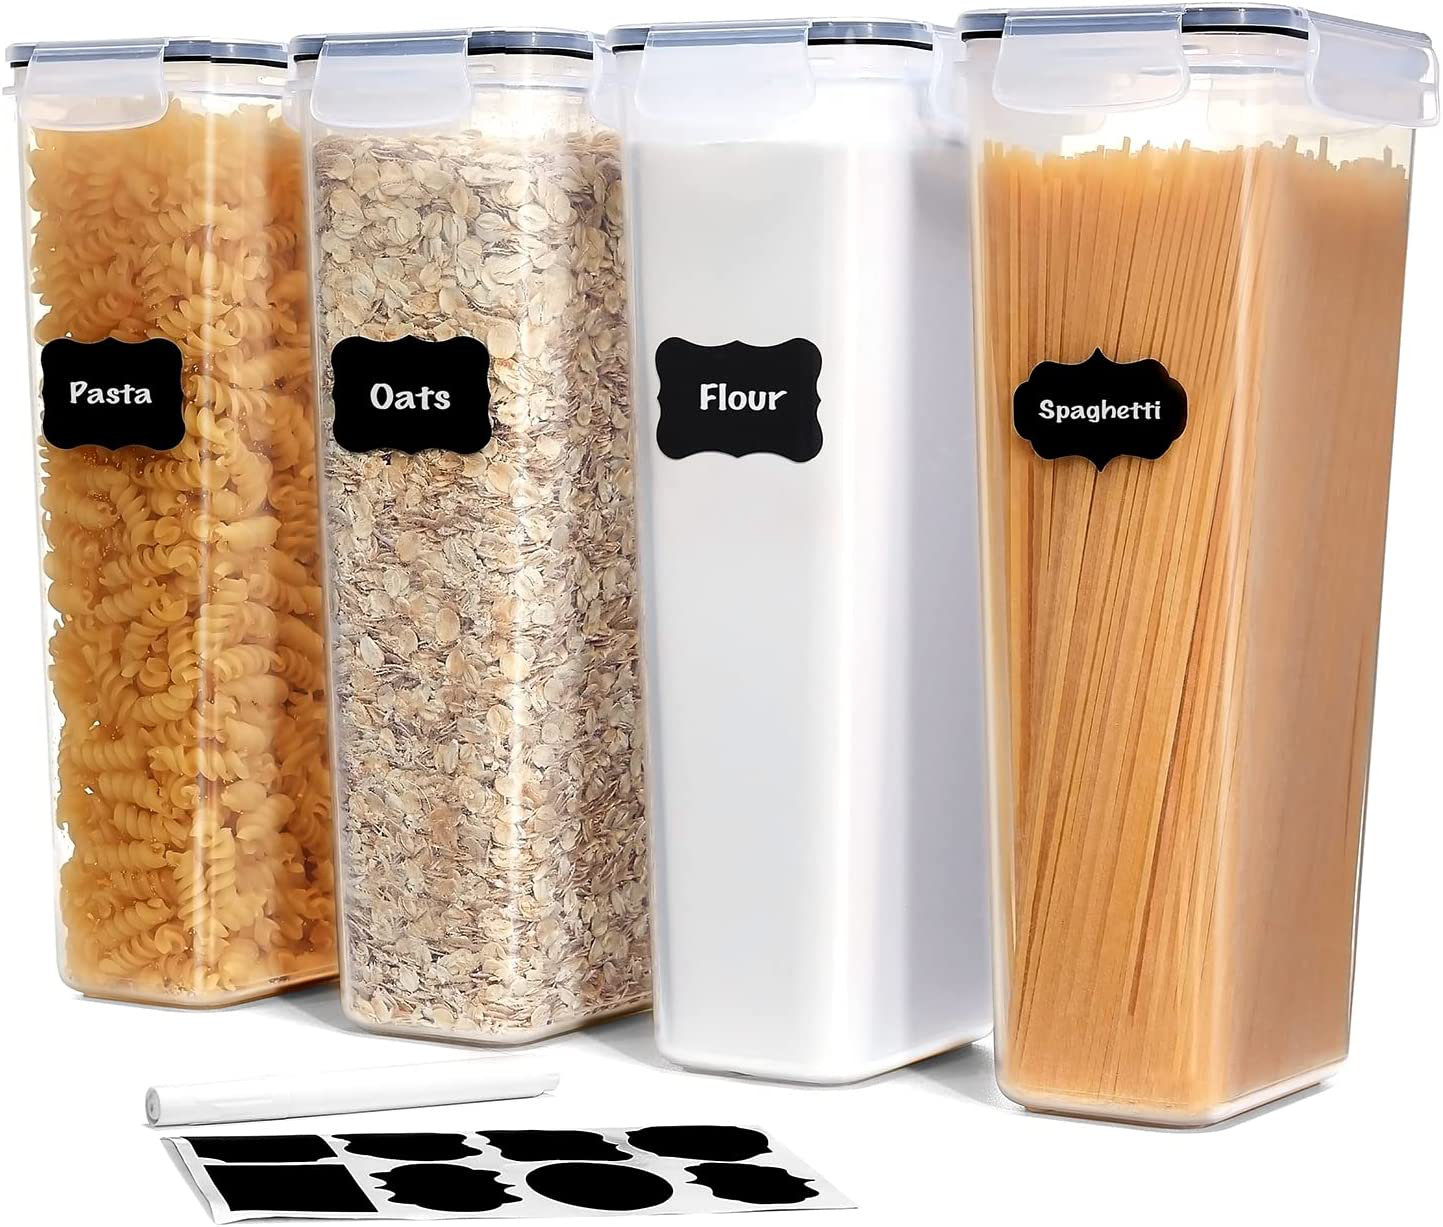 Cheer Collection One Size Airtight Food Storage Containers - Set